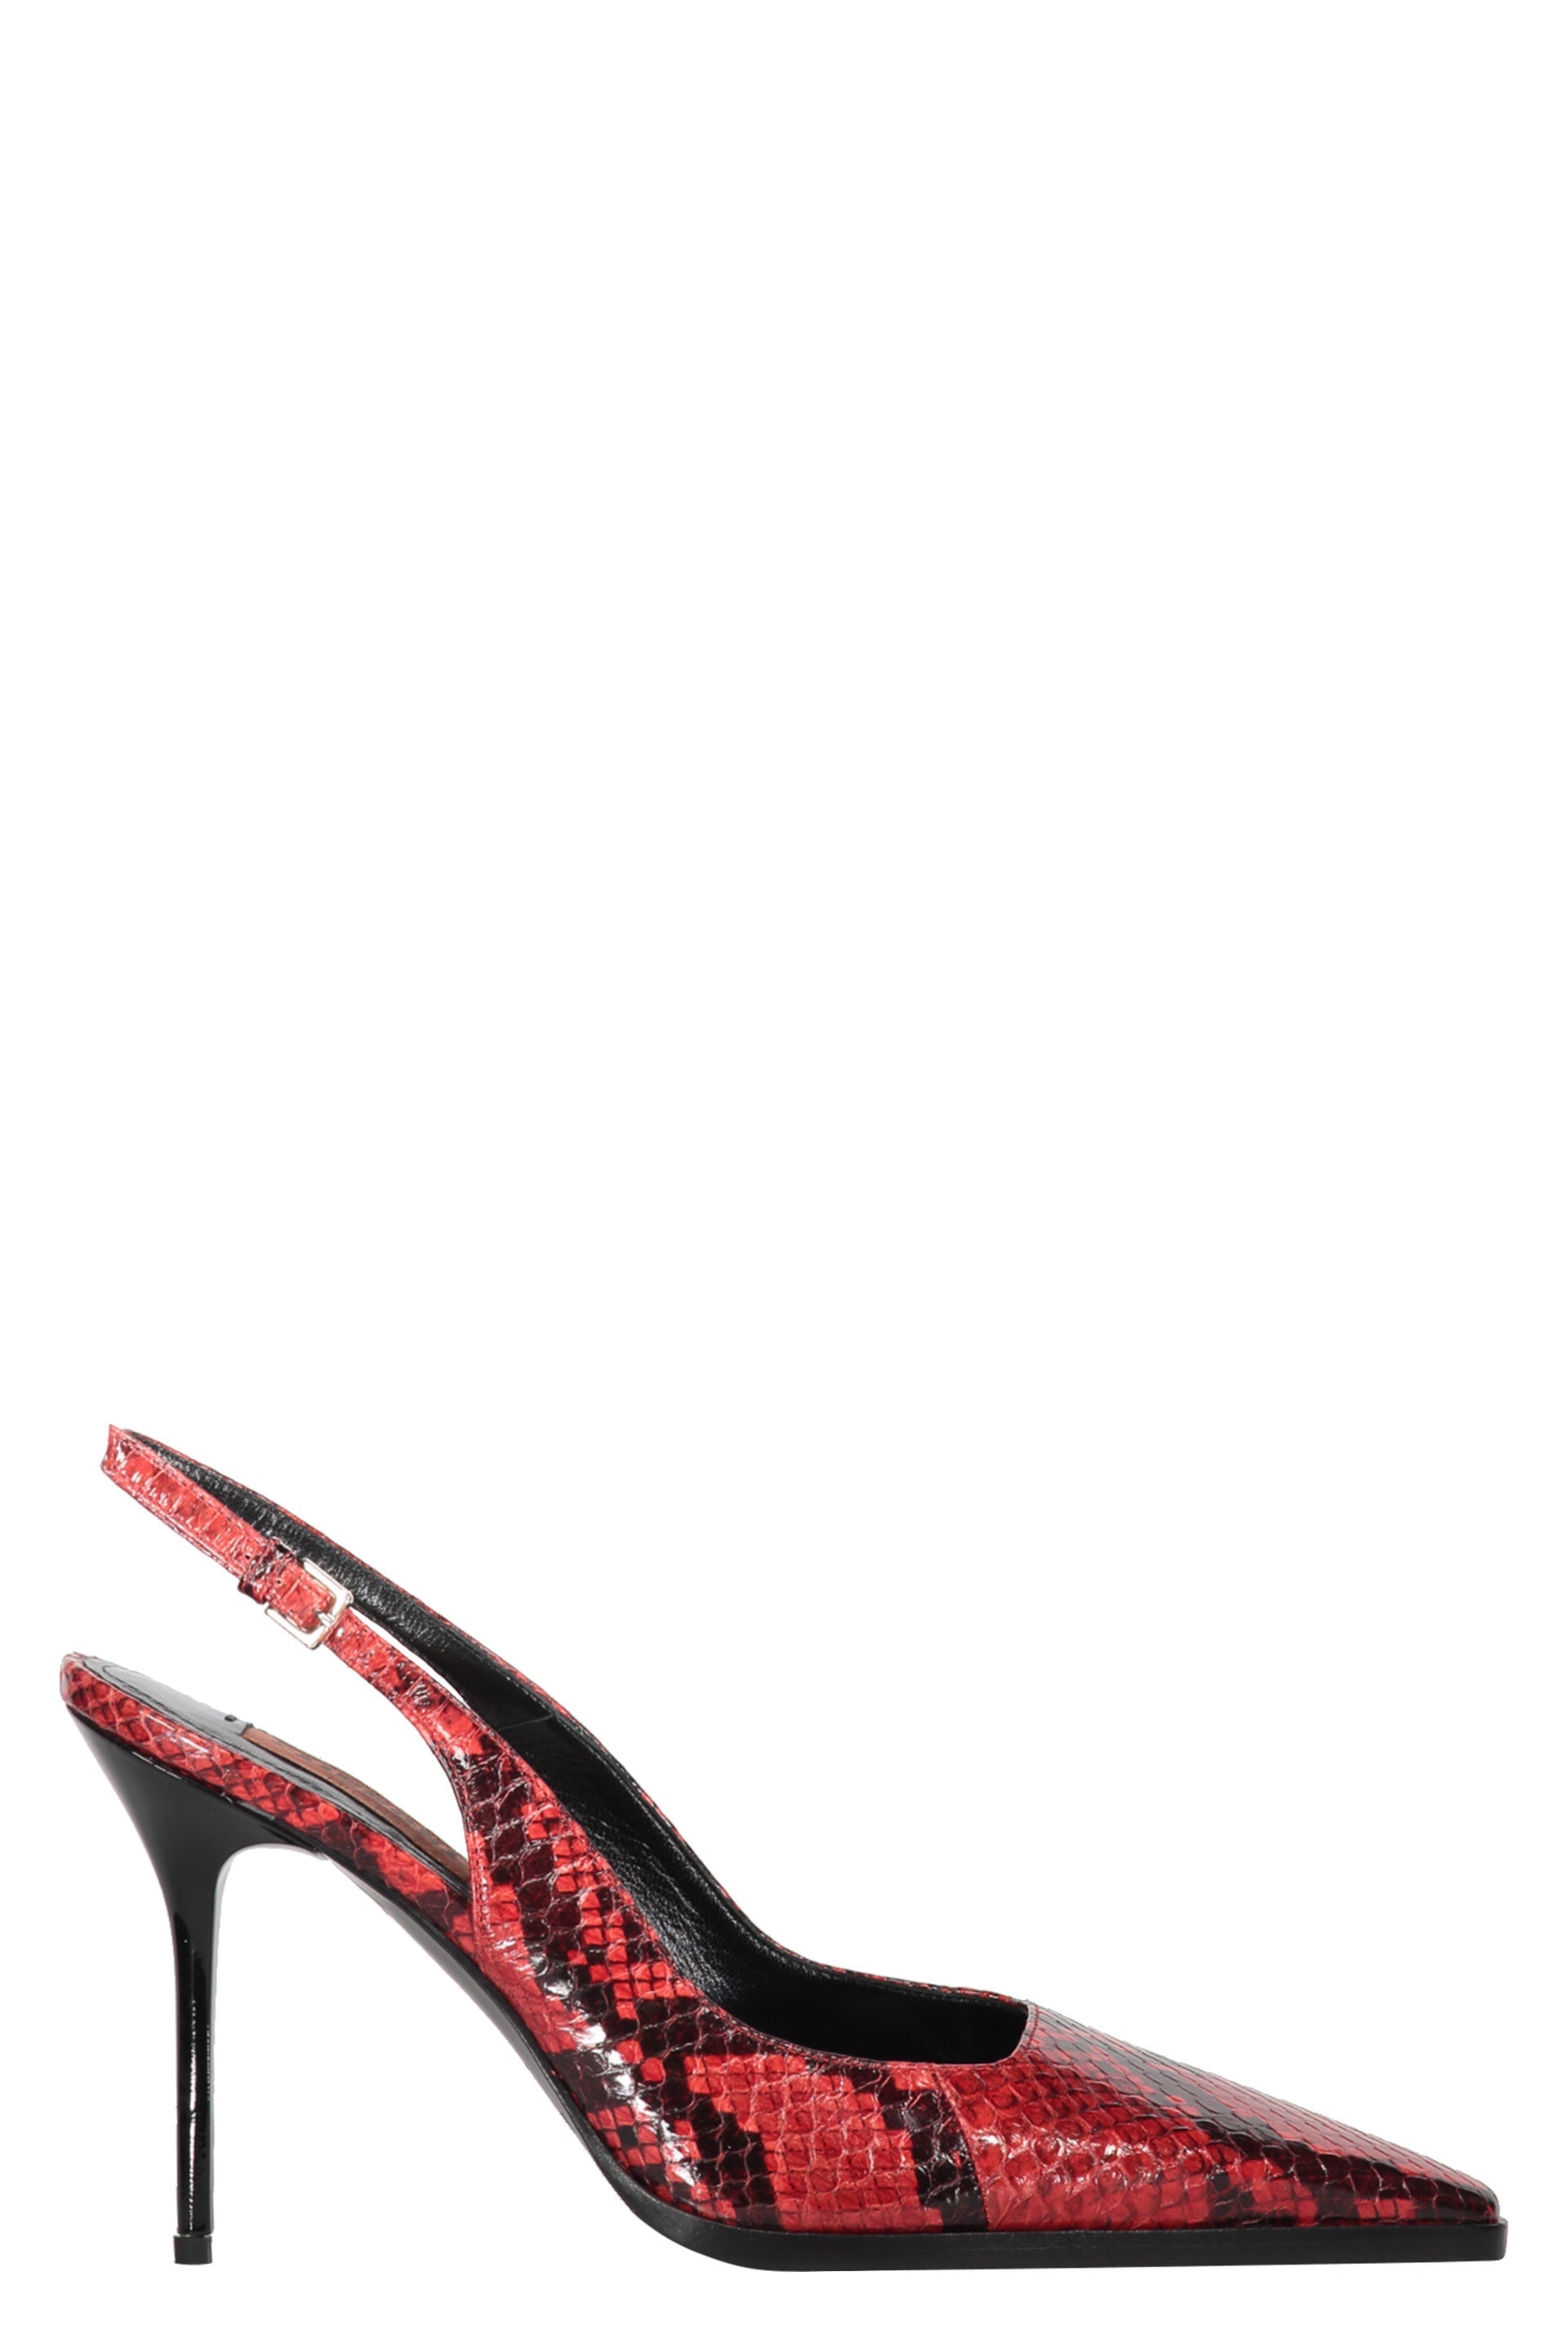 Missoni-OUTLET-SALE-Two-tone-leather-slingback-pumps-Pumps-37-ARCHIVE-COLLECTION.jpg